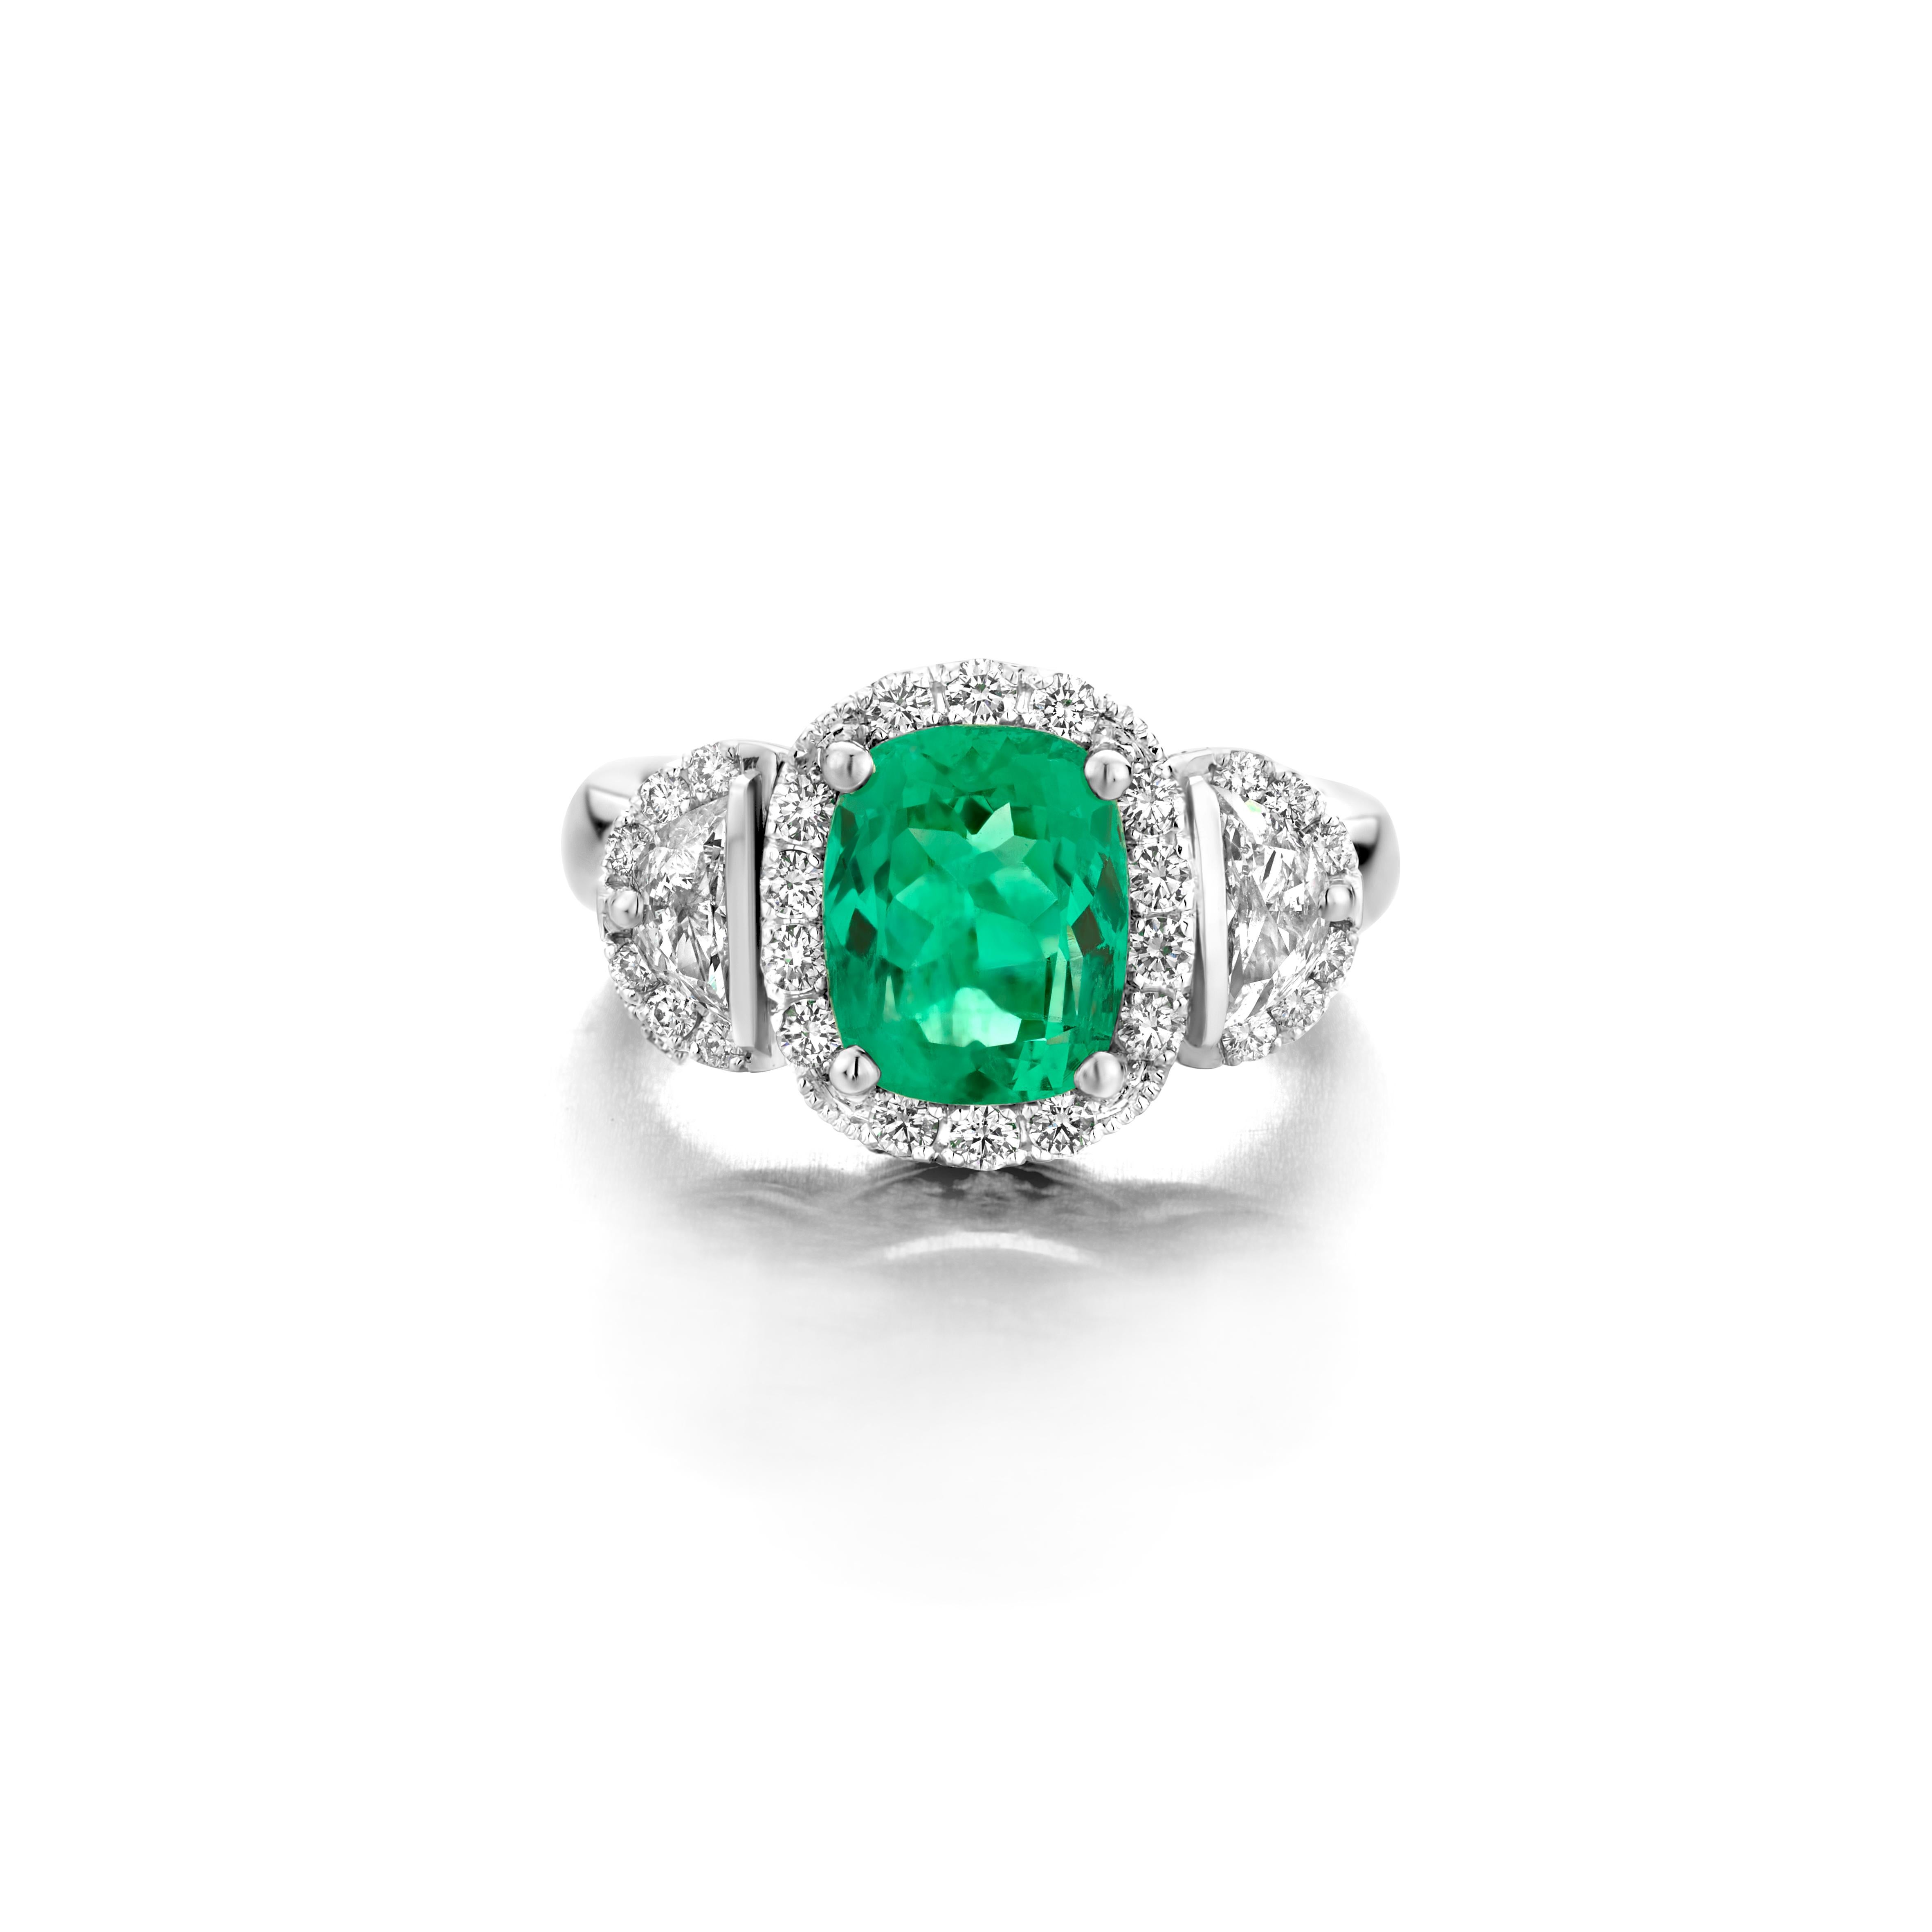 Cushion Cut Certified 2.47 Carat Colombian Emerald Diamond 18 Karat White Gold Cocktail Ring For Sale